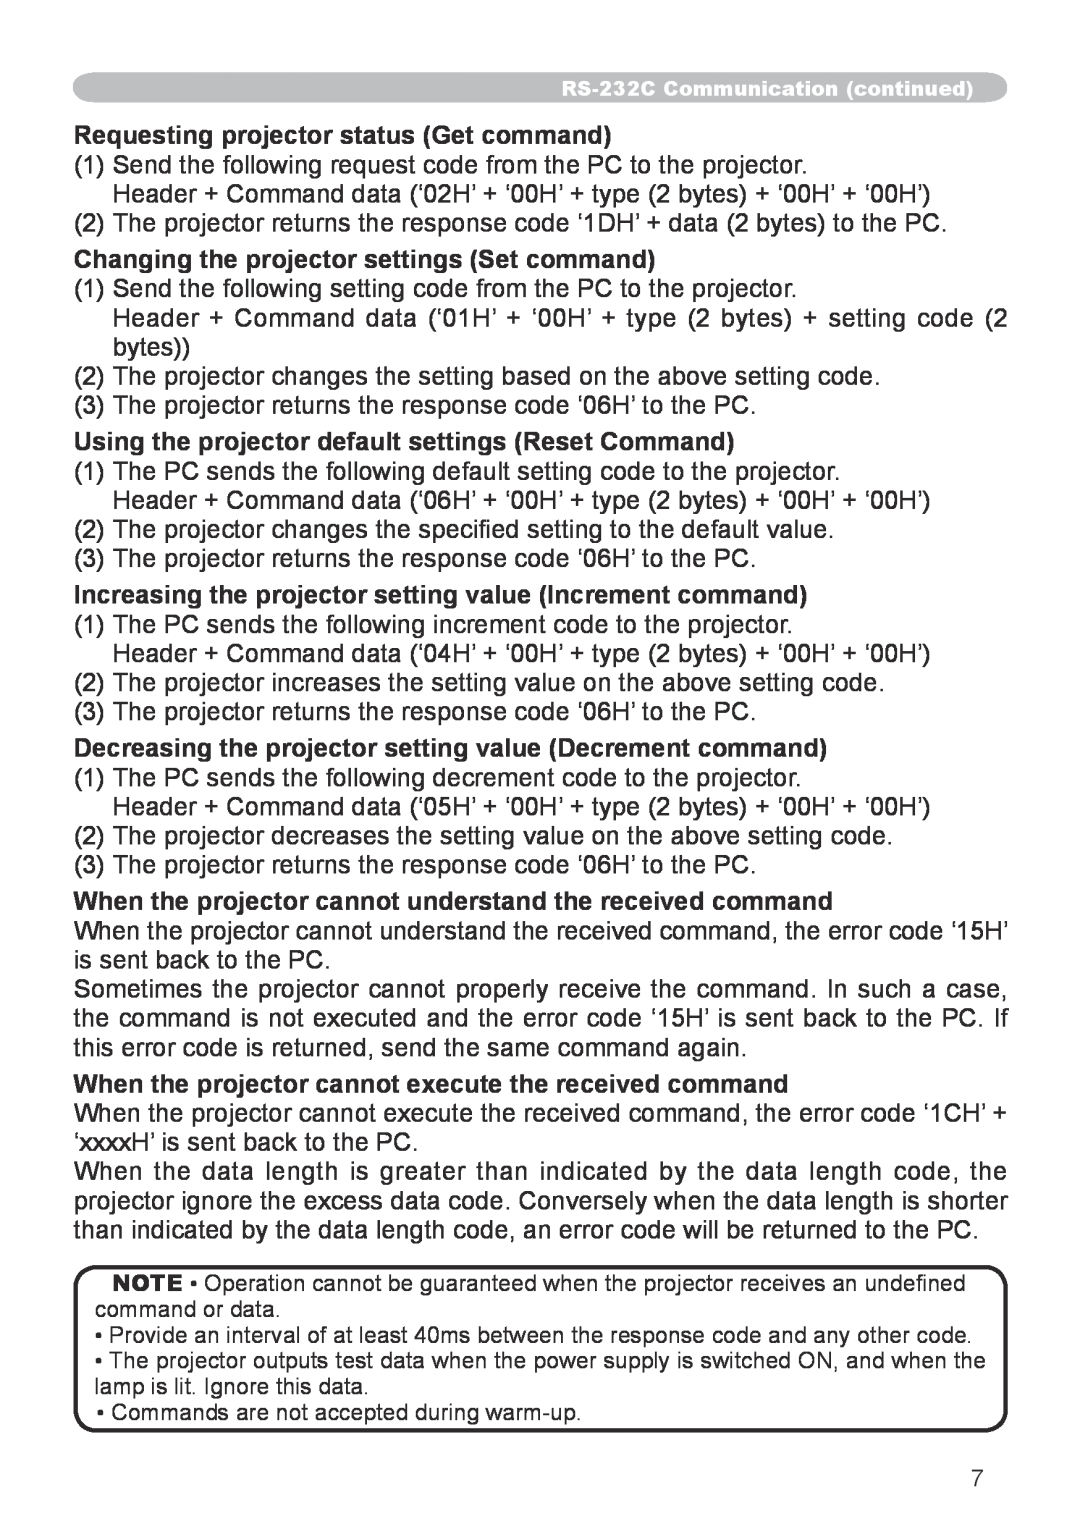 Hitachi CP-X253 user manual Requesting projector status Get command, Changing the projector settings Set command 